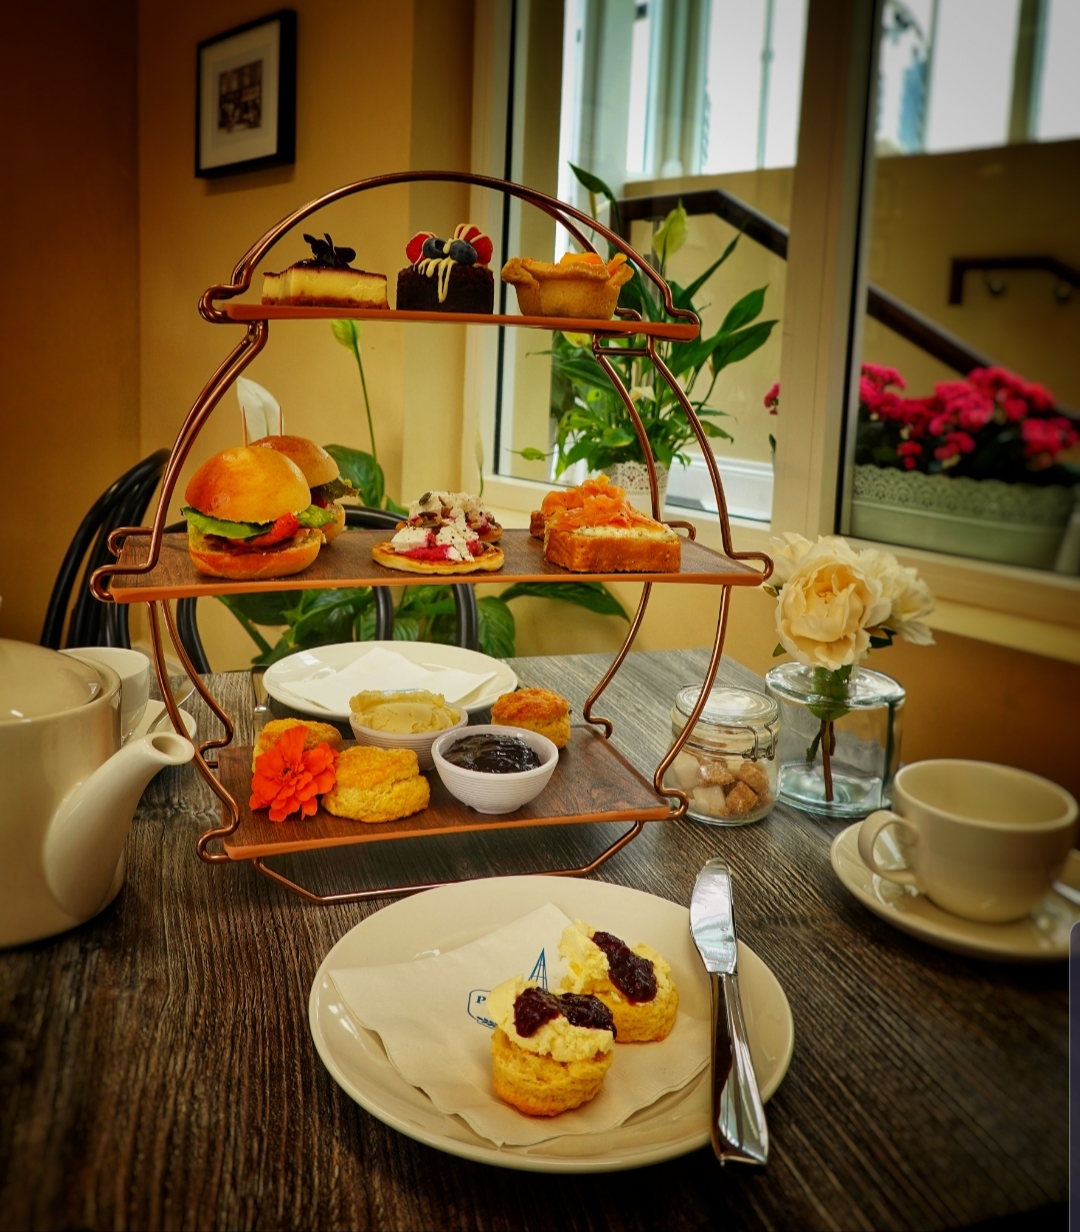 Enjoy our Legacy Tour & Tasting Experience with Afternoon Tea in our Tea Room at Pearse Lyons Distillery from Saturday, October 26th. 